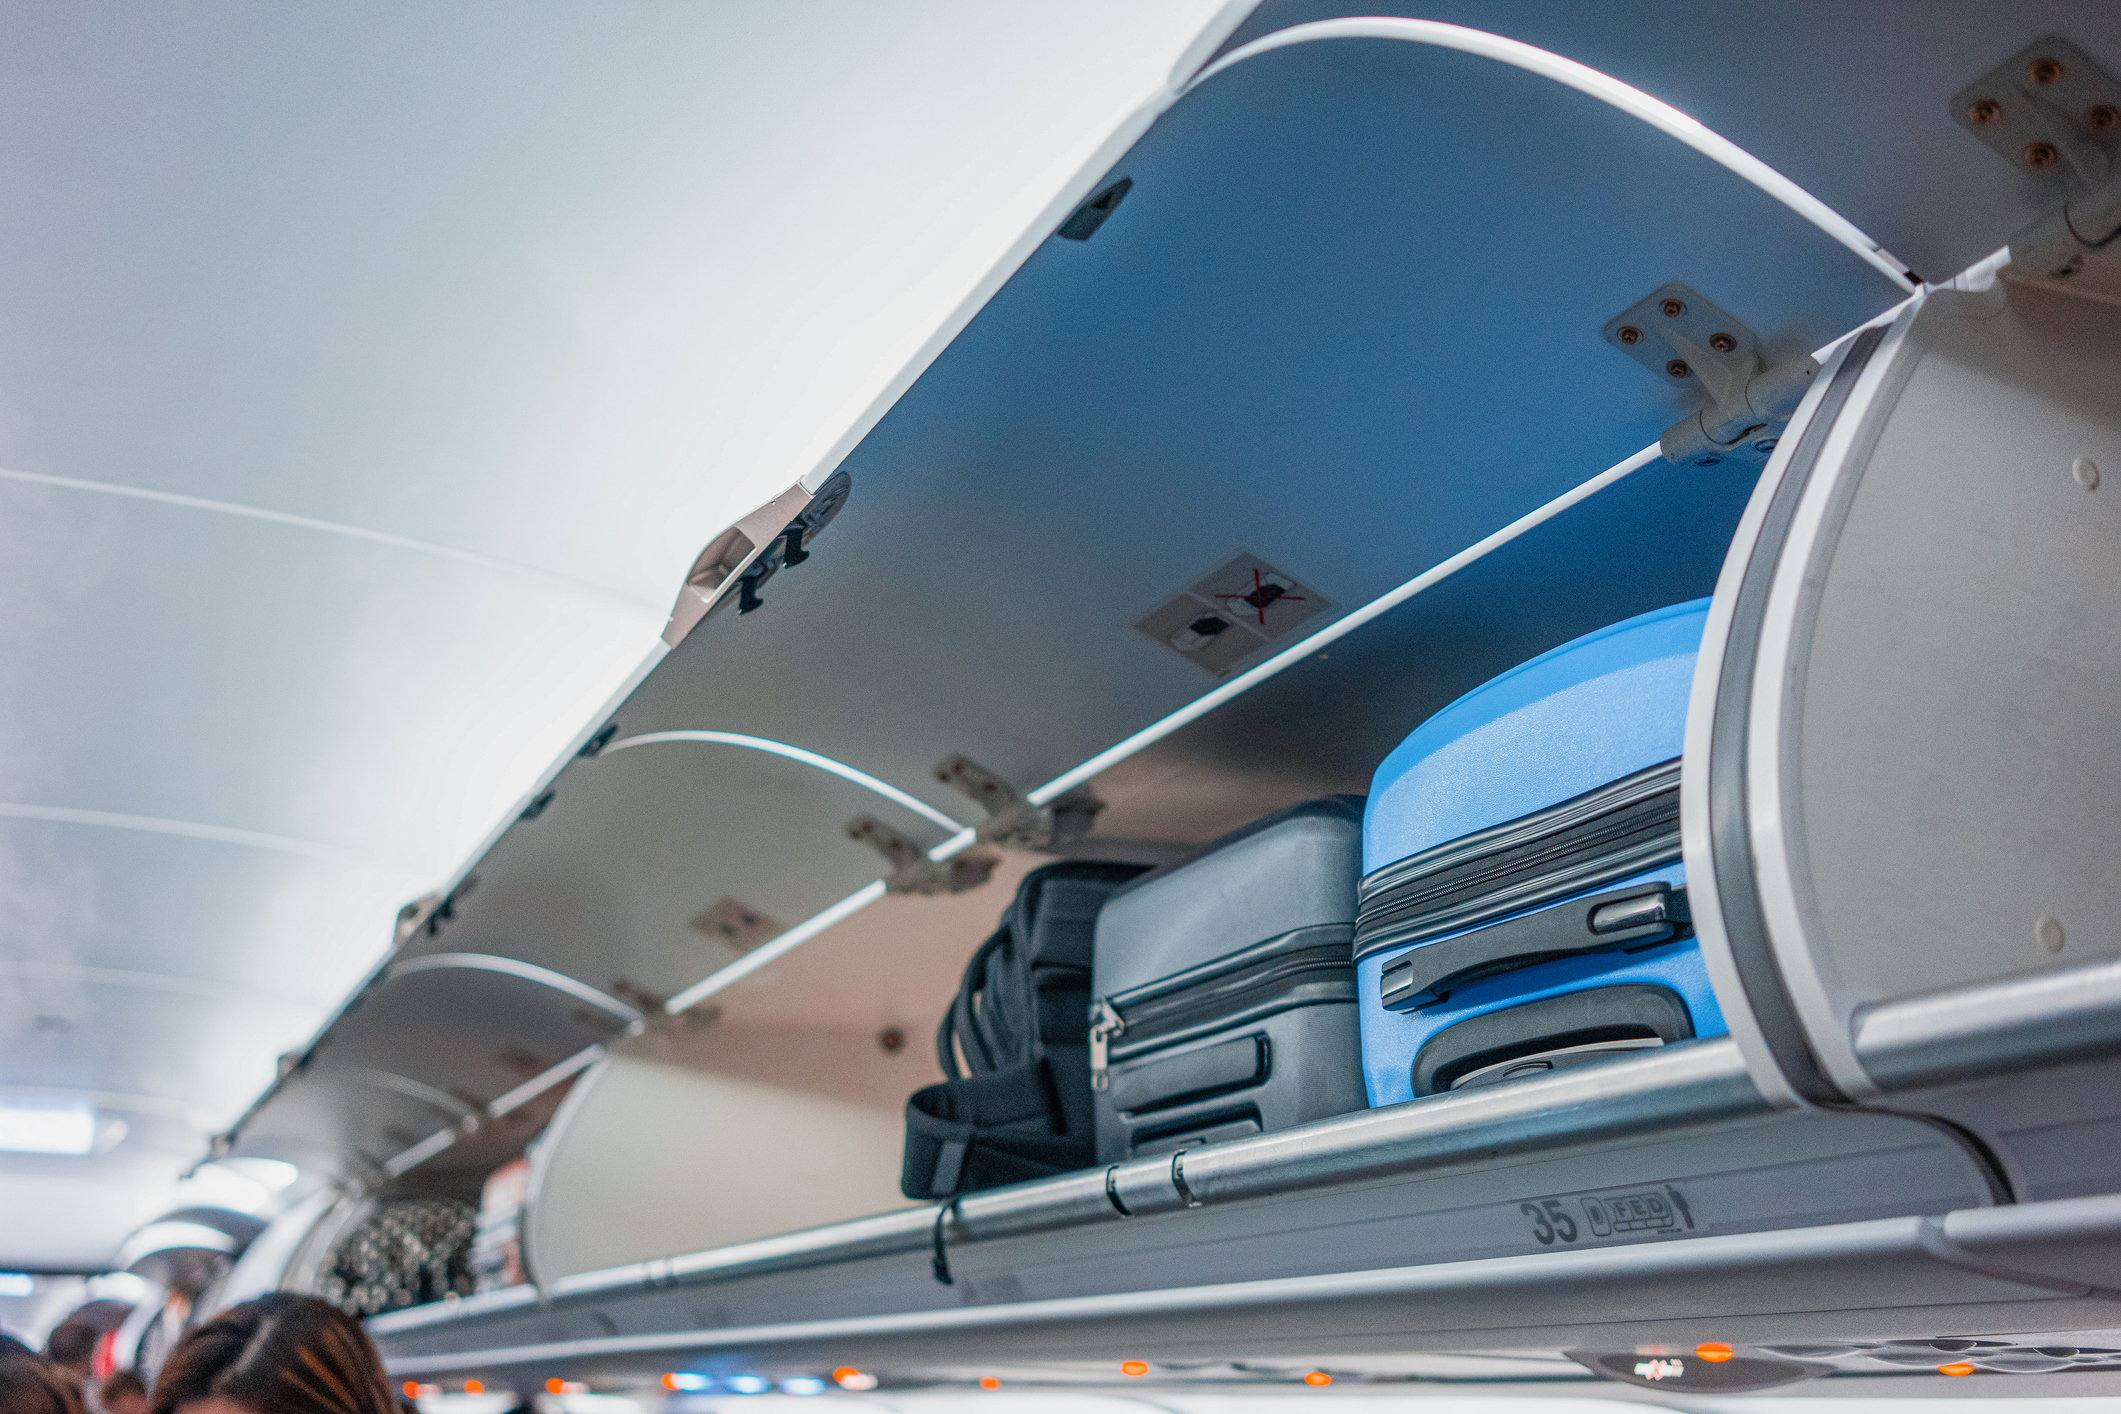 Luggage stored in overhead bins on an airplane